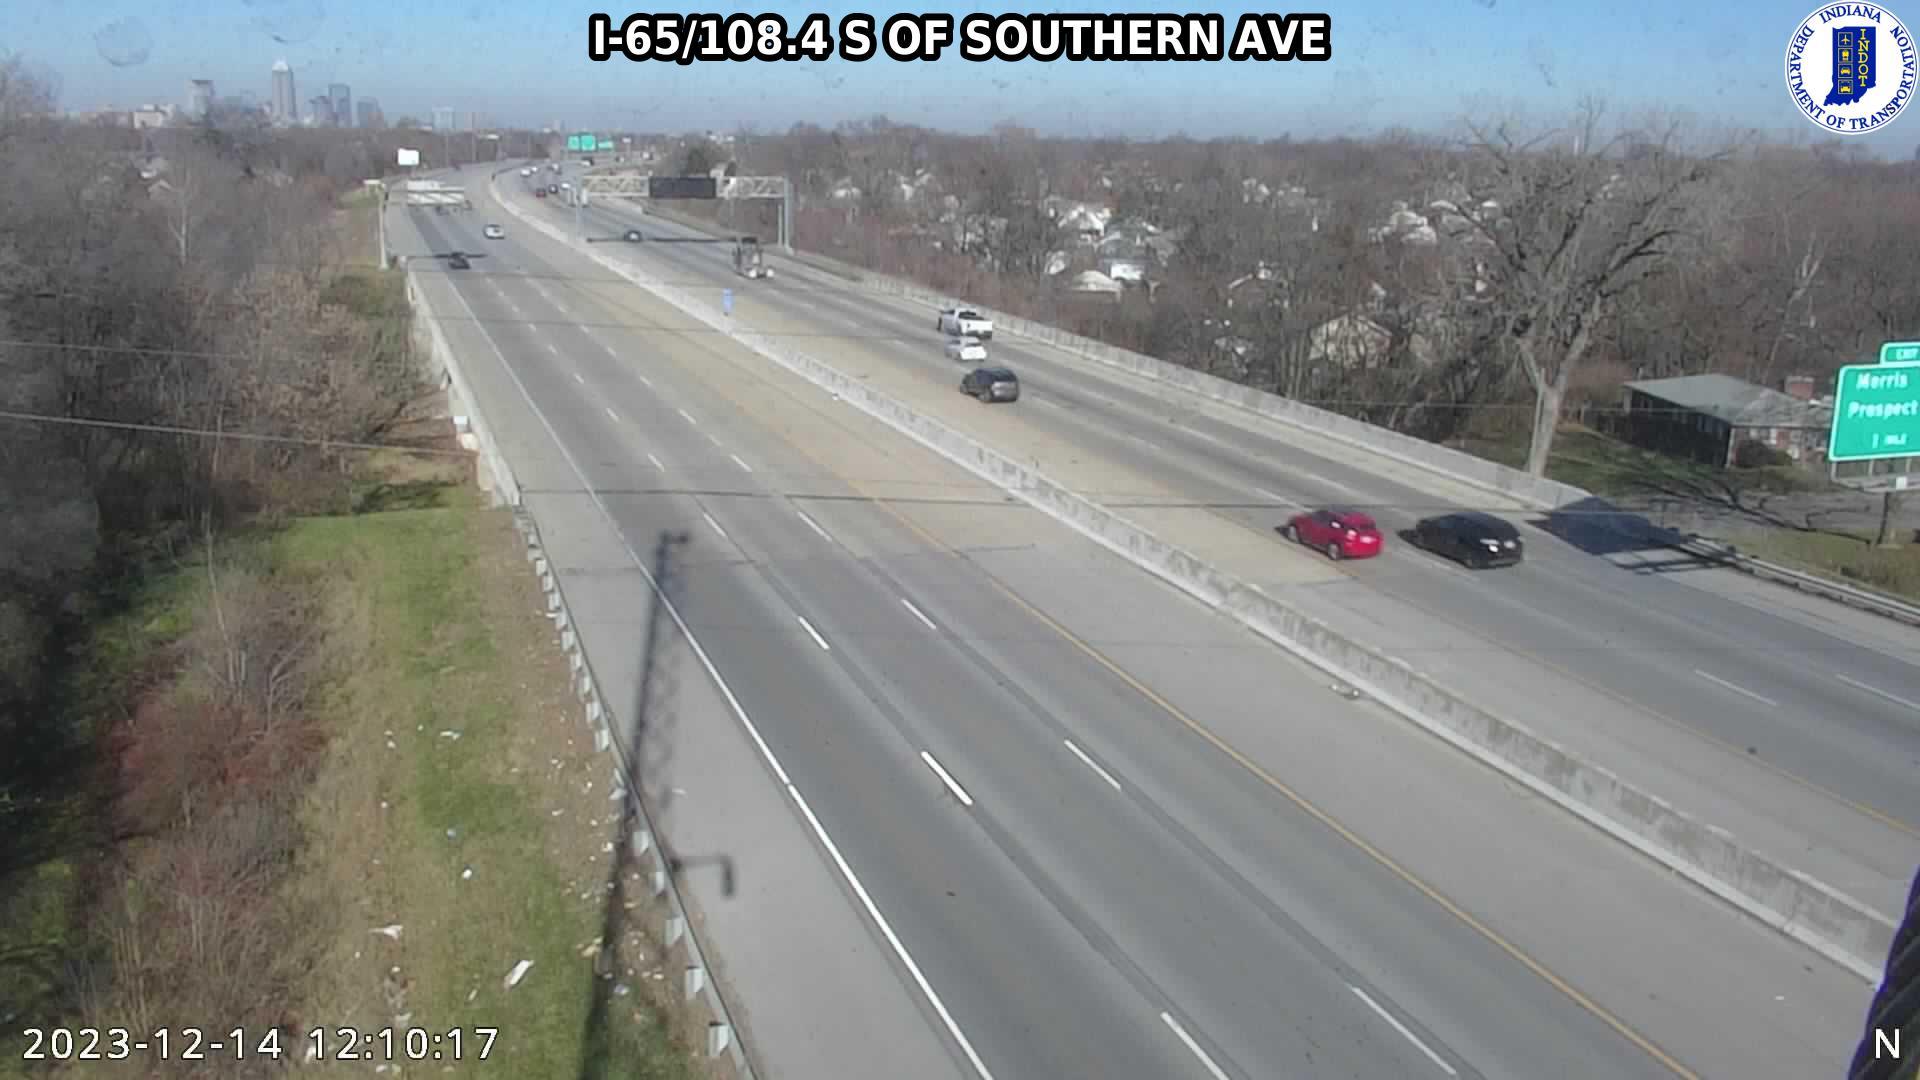 Traffic Cam Garfield Park: I-65: I-65/108.4 S OF SOUTHERN AVE